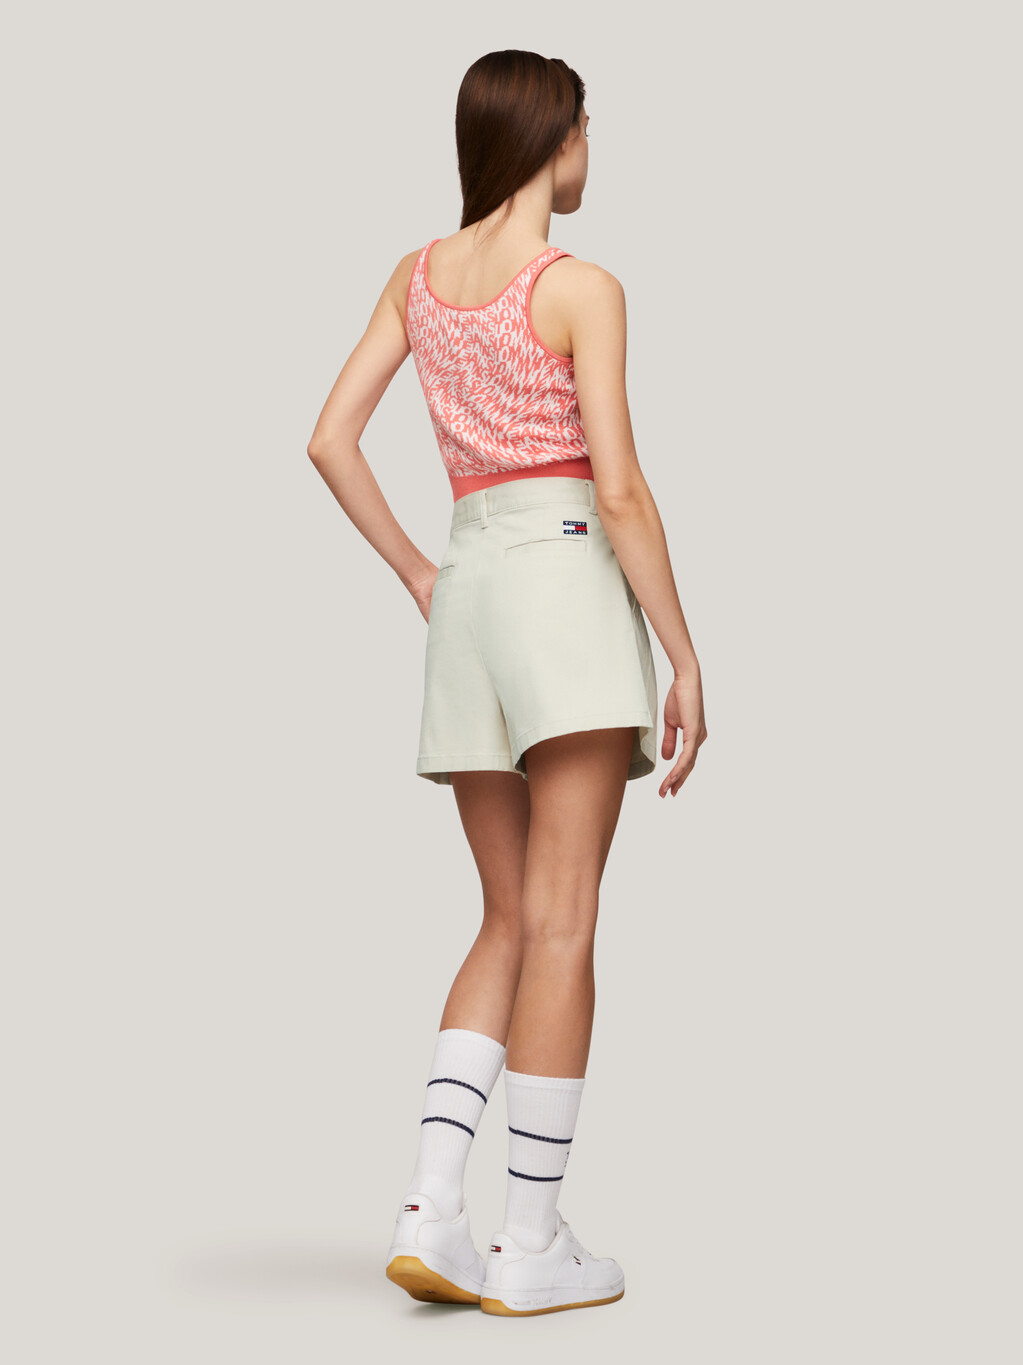 Claire Essential High Rise Pleated Chino Shorts, Newsprint, hi-res